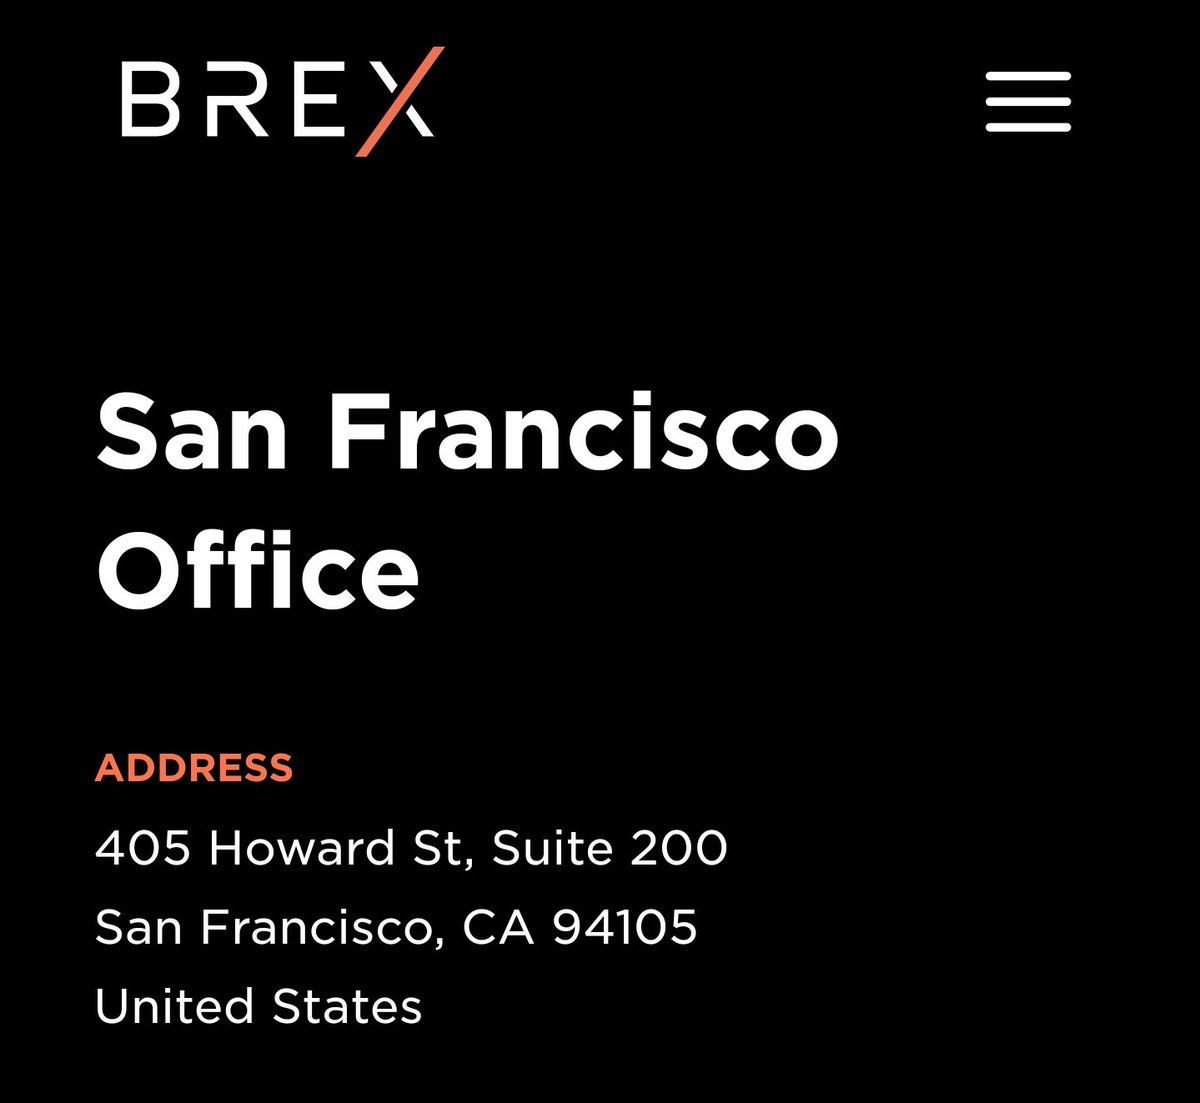 The address listed on the FEC filings is 153 Townsend St Floor 6, San Francisco. There is nothing indicating that Veyond rents that space. But a company called BREX popped up in the results, even though the Brex website lists their SF office in another location.